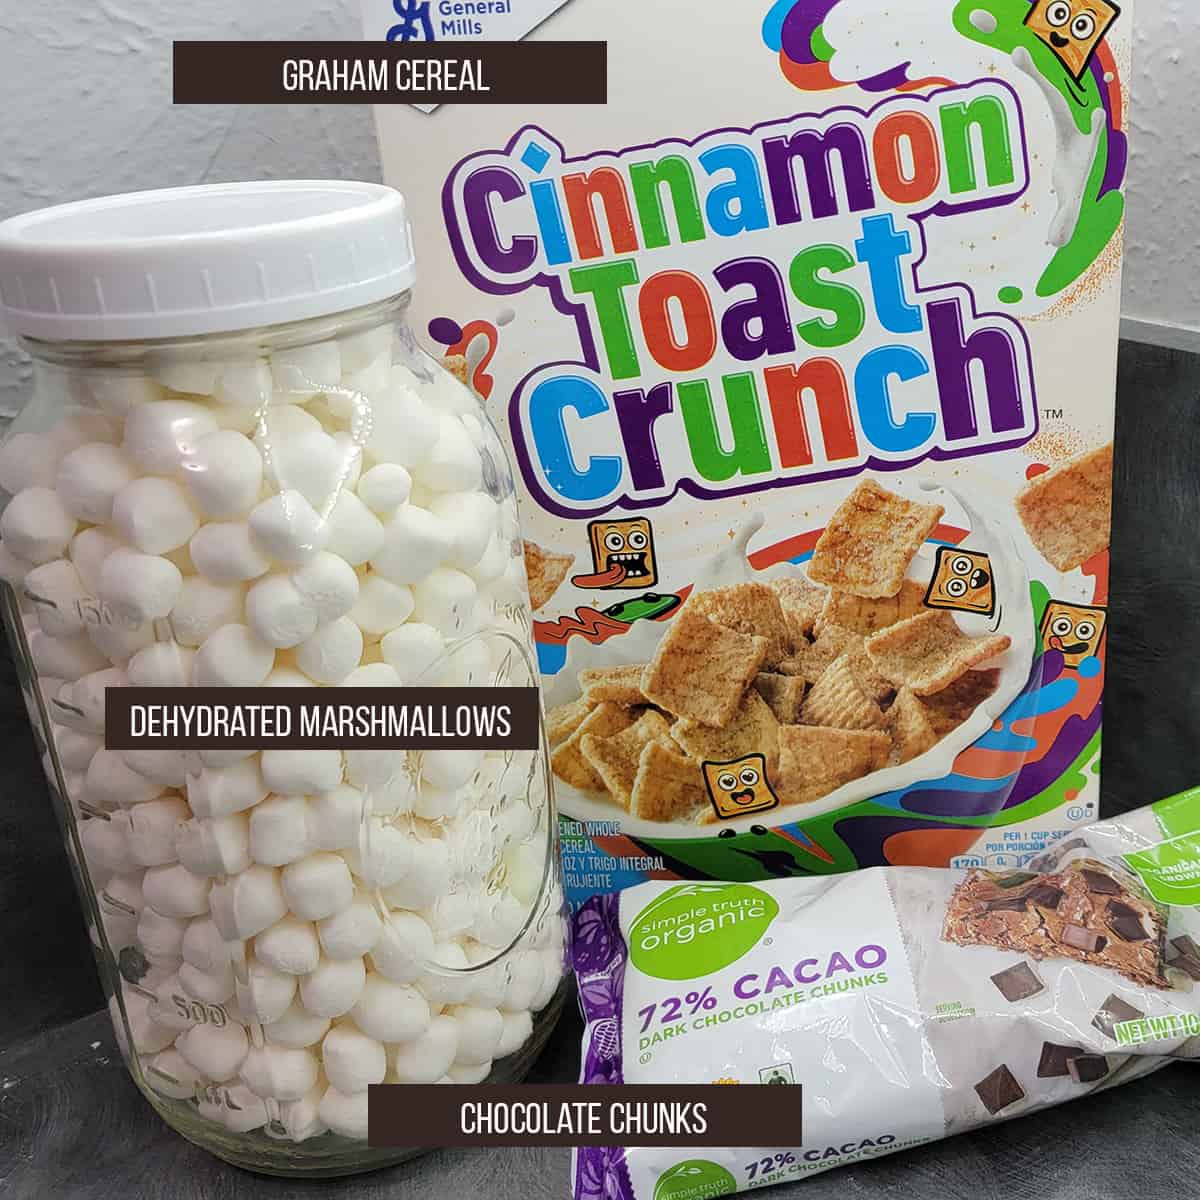 Ingredients for Crunchy S'more Mix: Dehydrated marshmallows, graham cereal and chocolate bits.